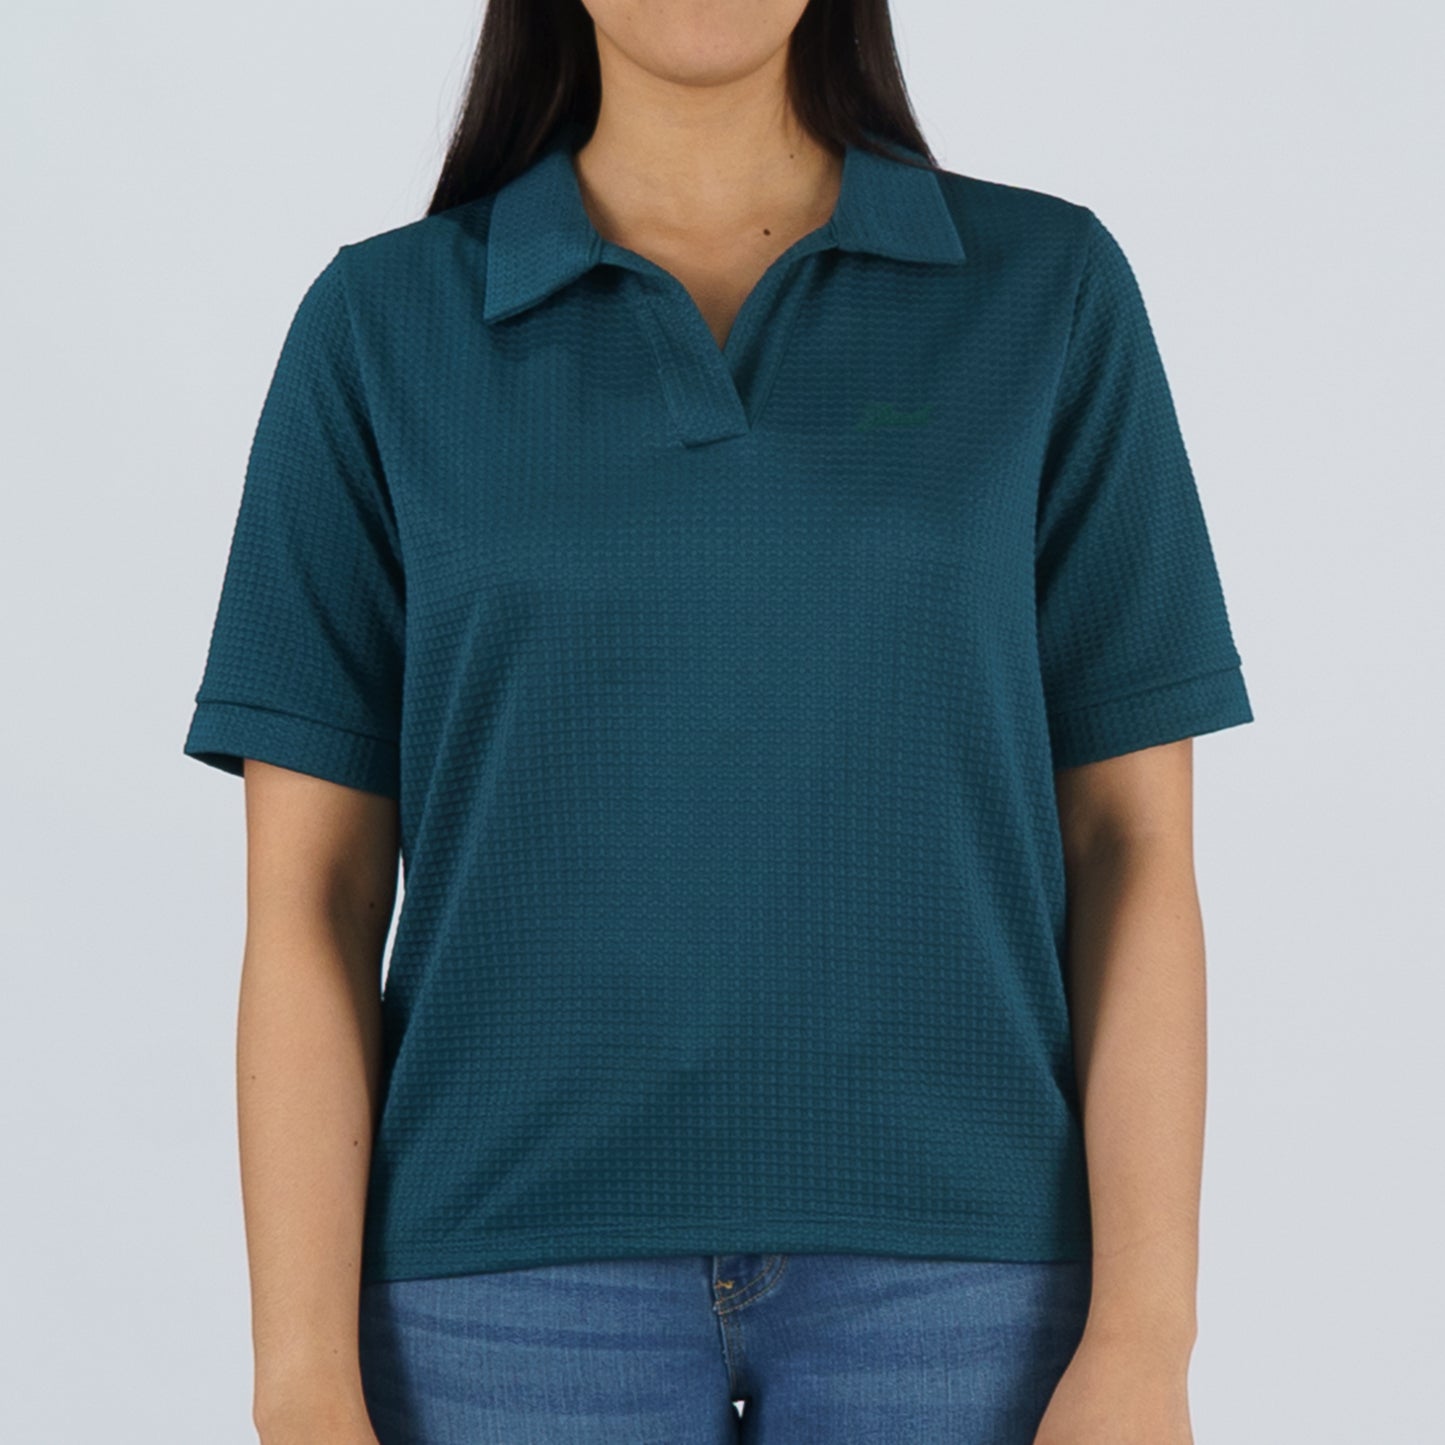 Petrol Basic Collared Shirt for Ladies Boxy Fitting Special Fabric Trendy fashion Casual Top Dark Green Polo shirt for Ladies 131240 (Dark Green)